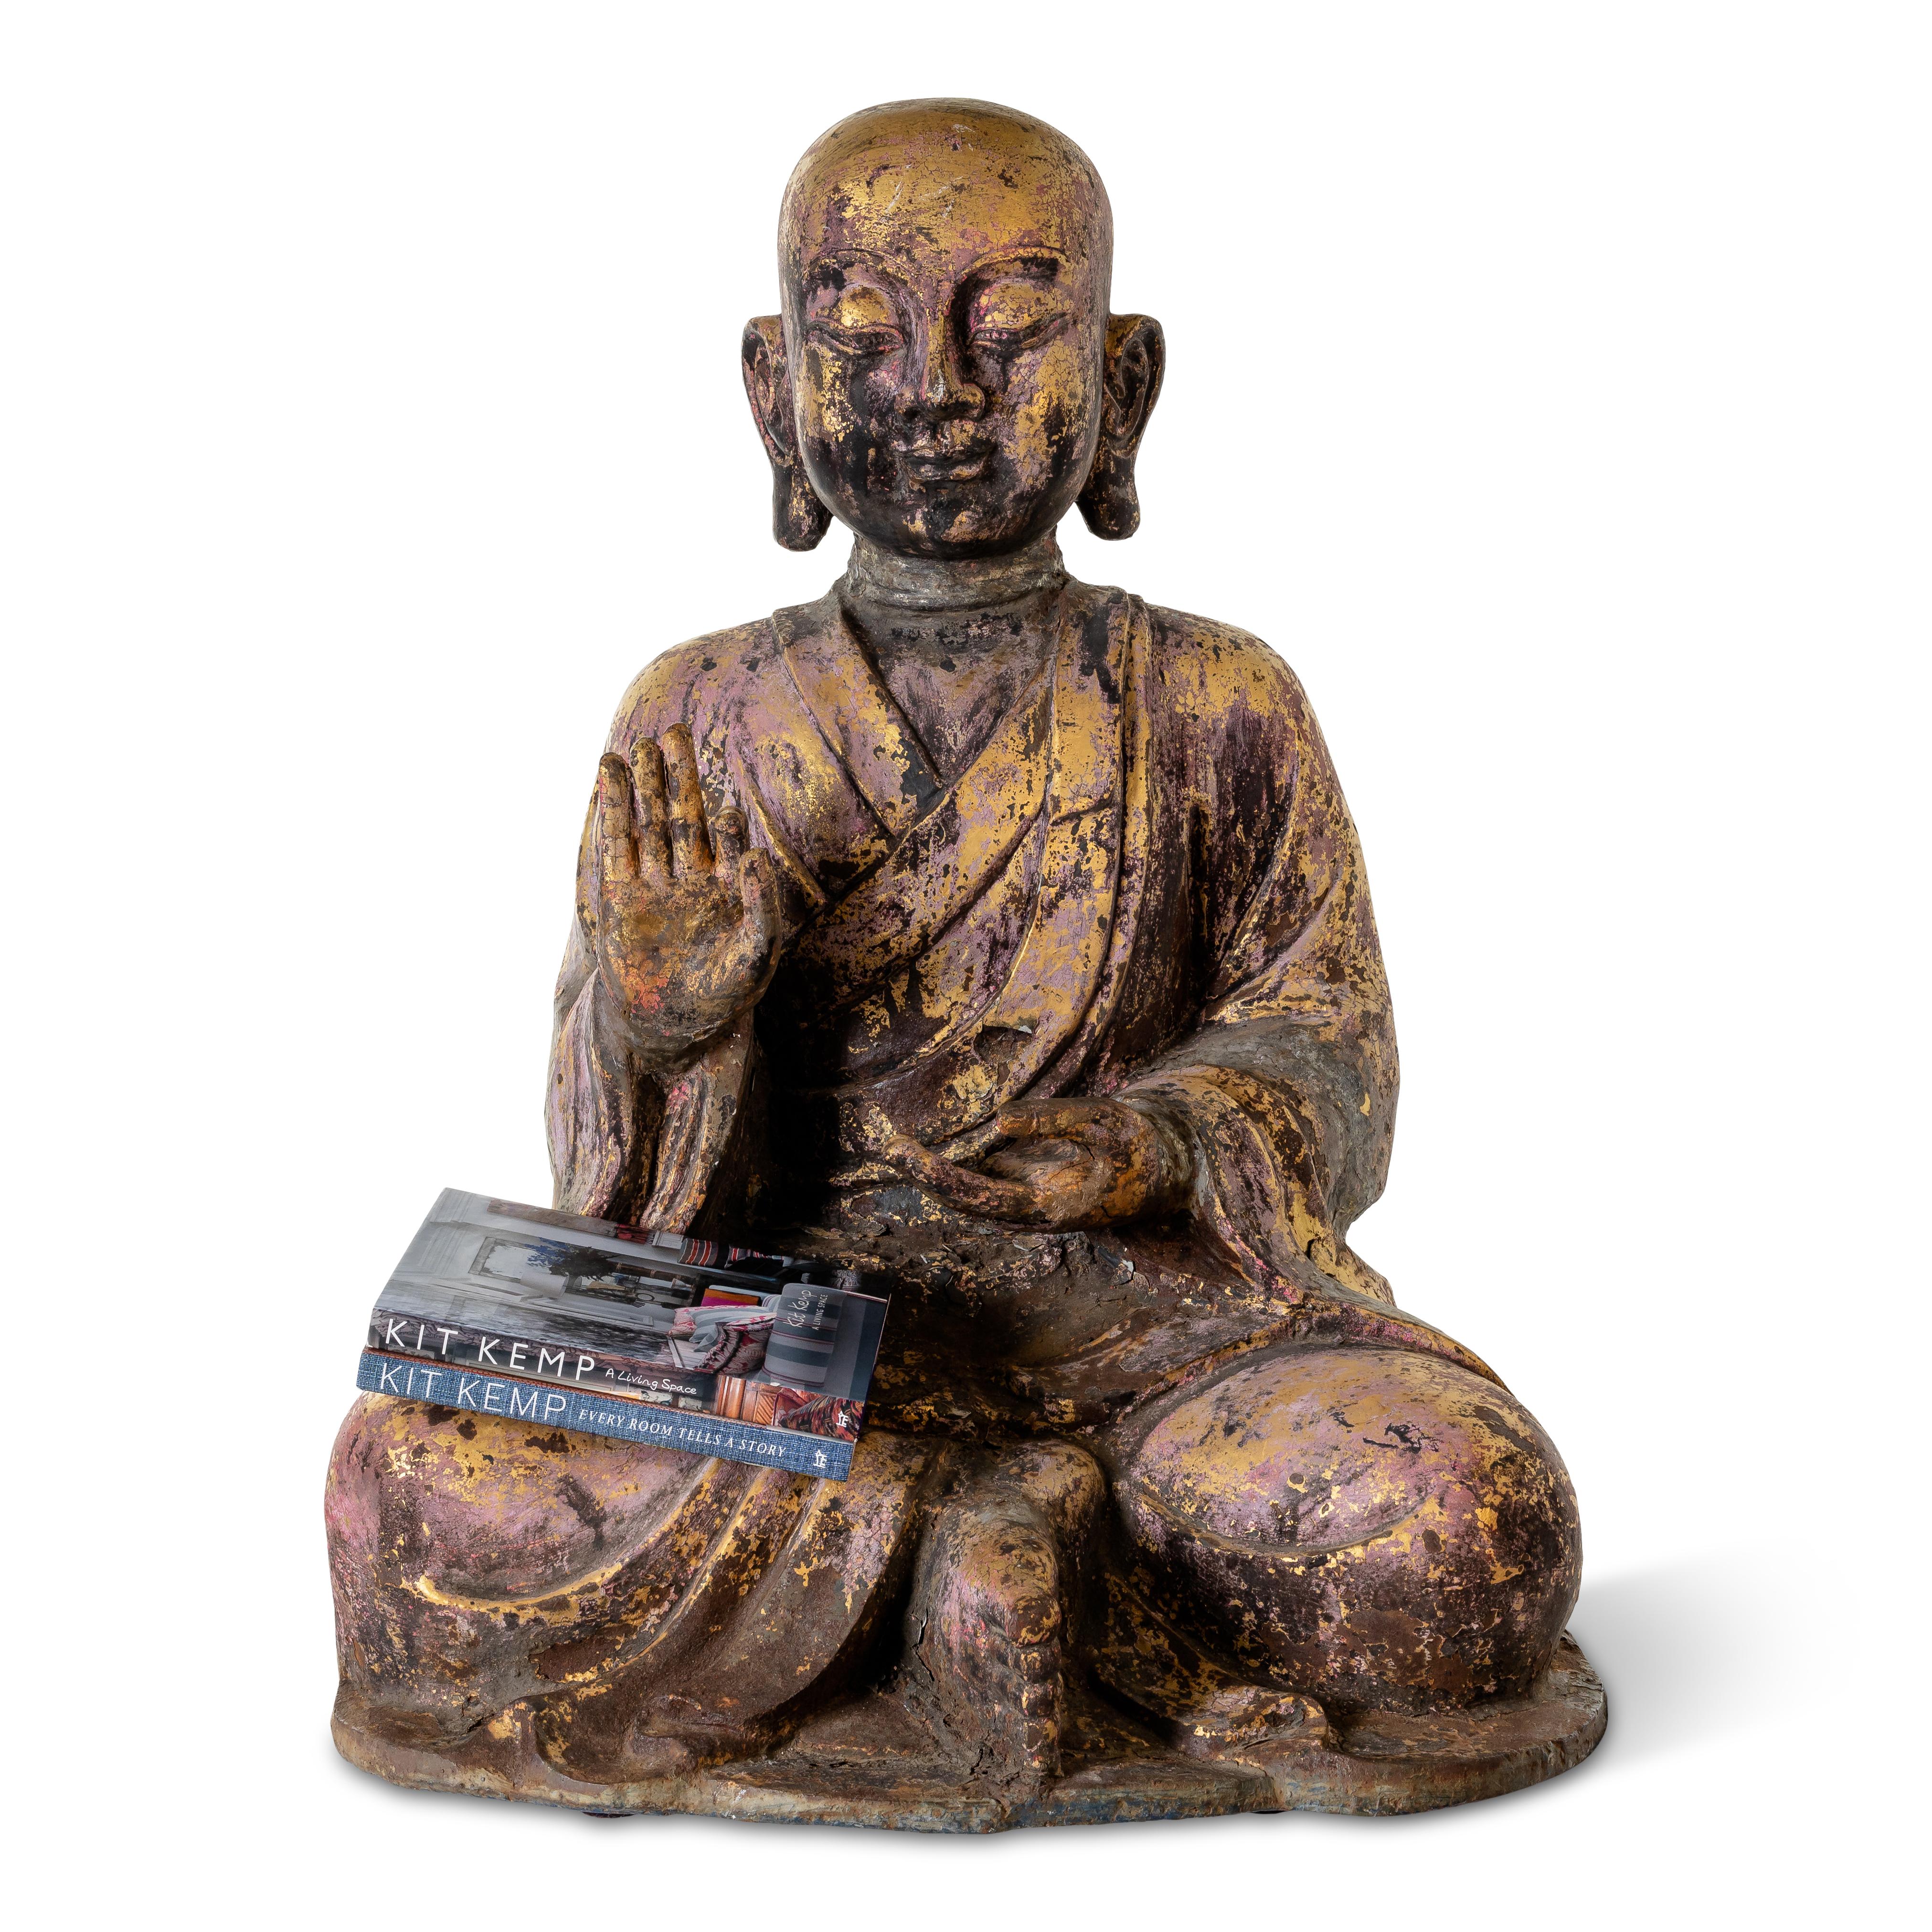 Replica of a large stone Chinese Buddha from the 15th-16th century featuring weathered paint in various colors.